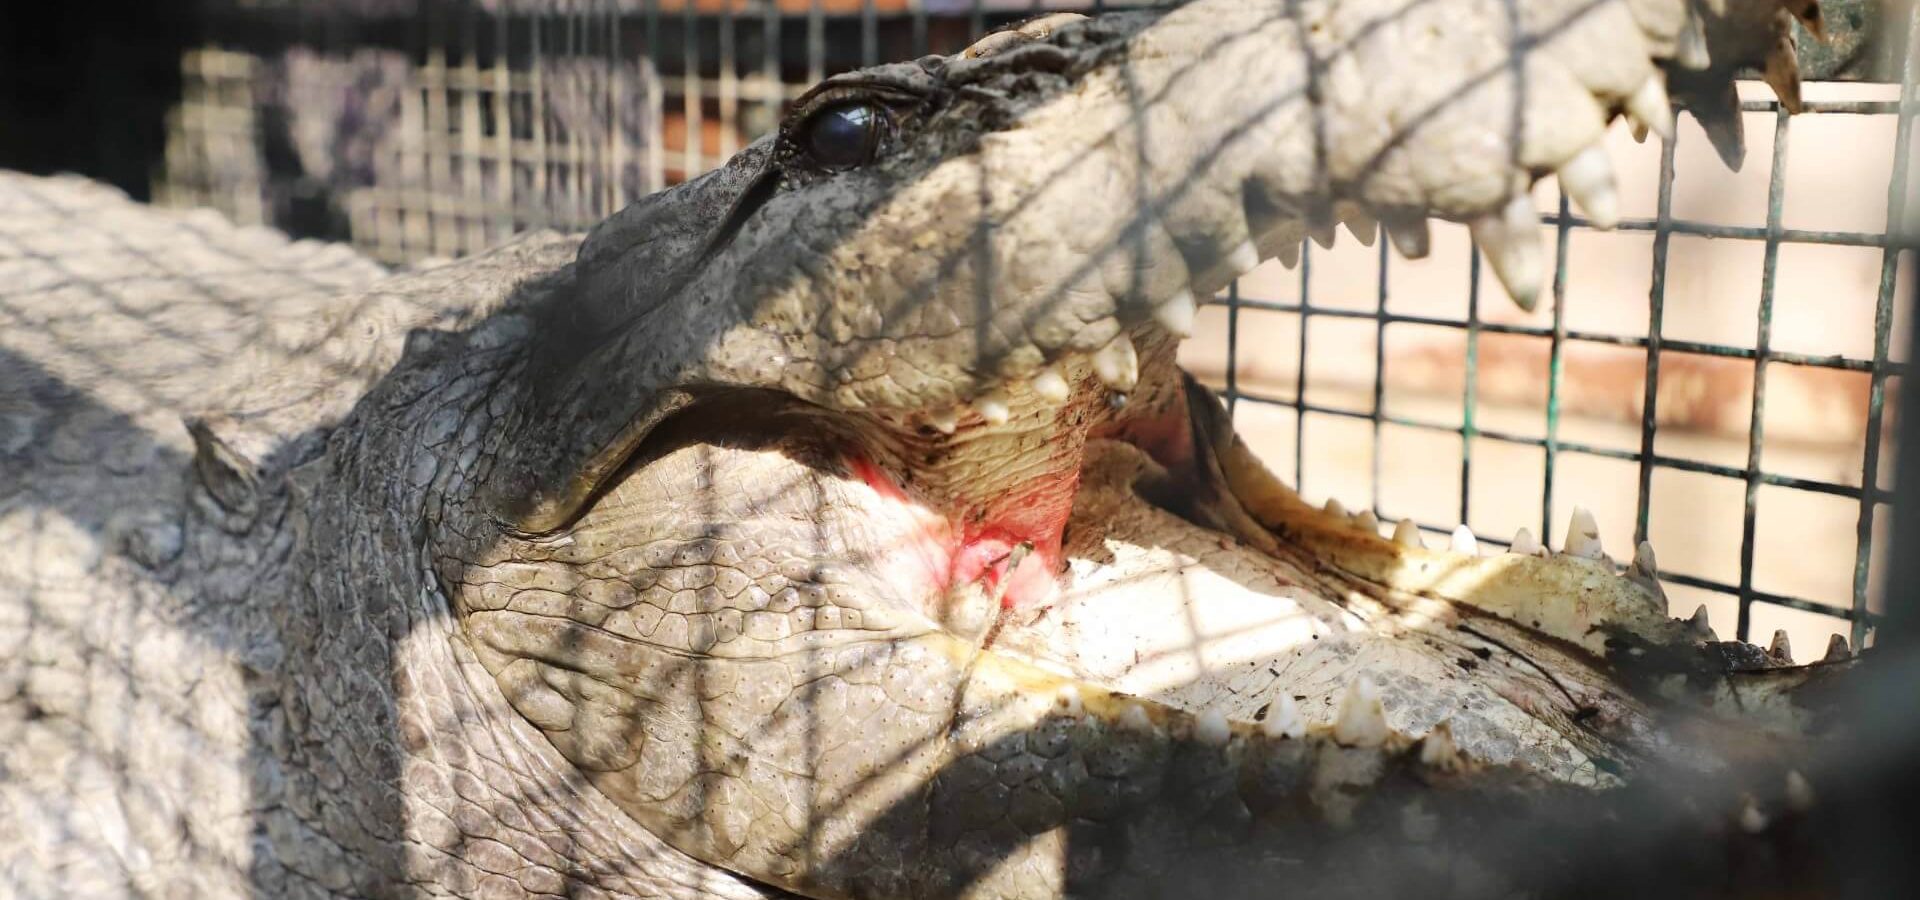 Fish Hook Catches the Wrong Bait - A Mugger Crocodile! - Wildlife SOS